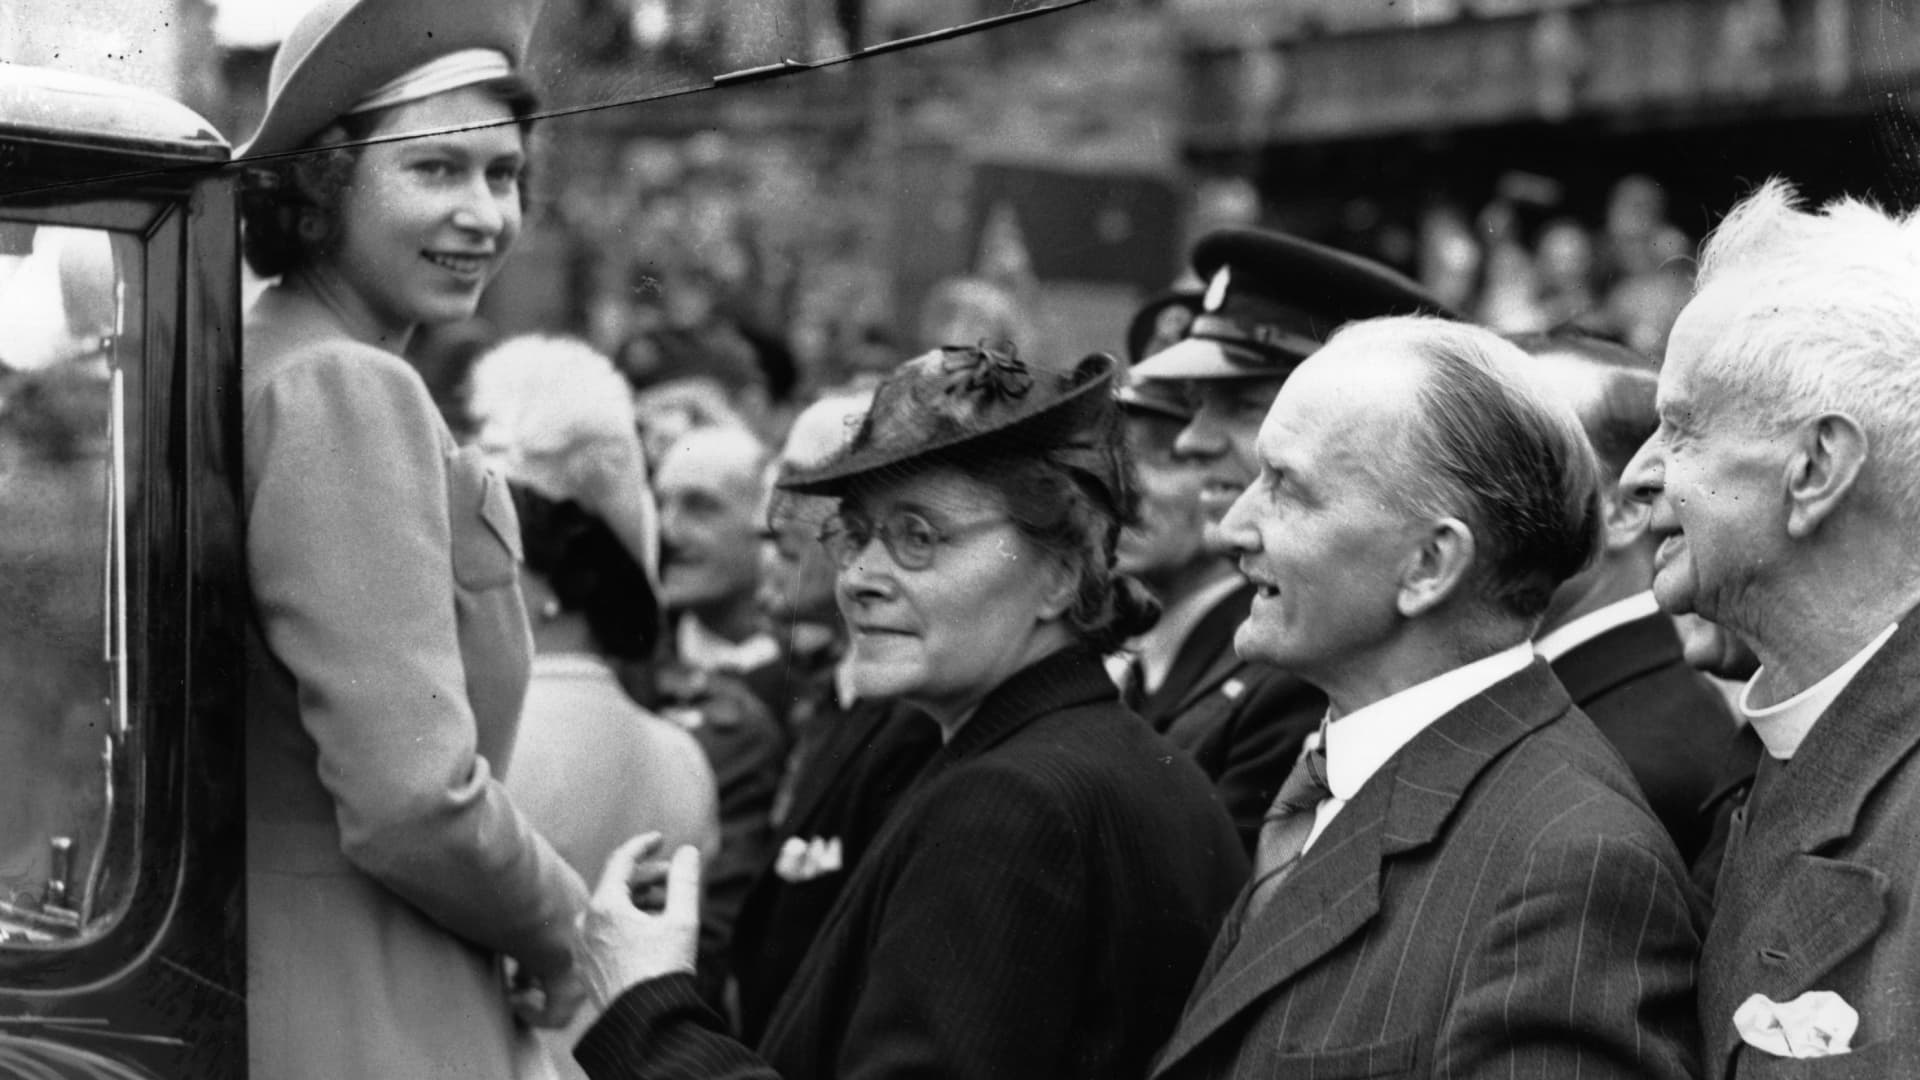 Princess Elizabeth (later Queen Elizabeth II) is greeted by crowds as she tours the East End of London on the day after VE Day, 9th May 1945.